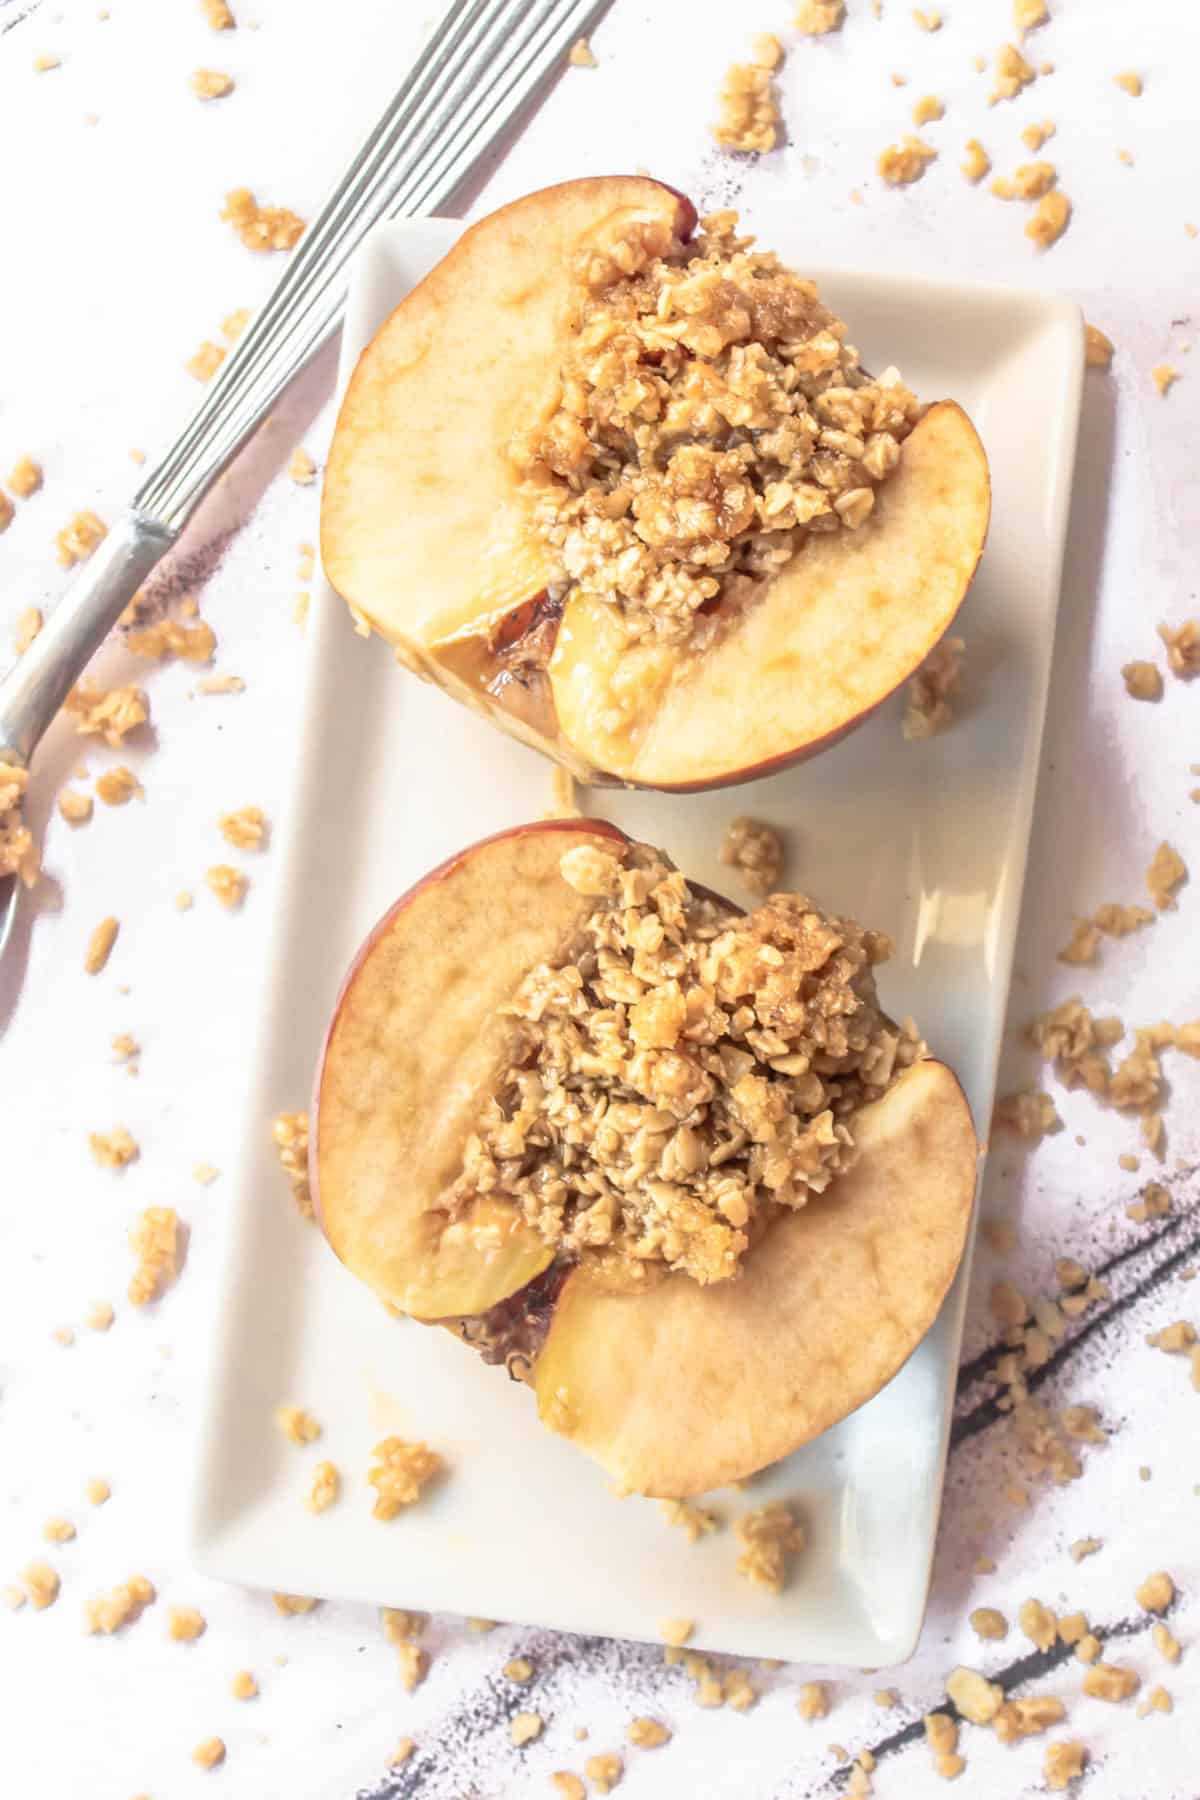 Two stuffed baked apples with oatmeal filling on a plate.